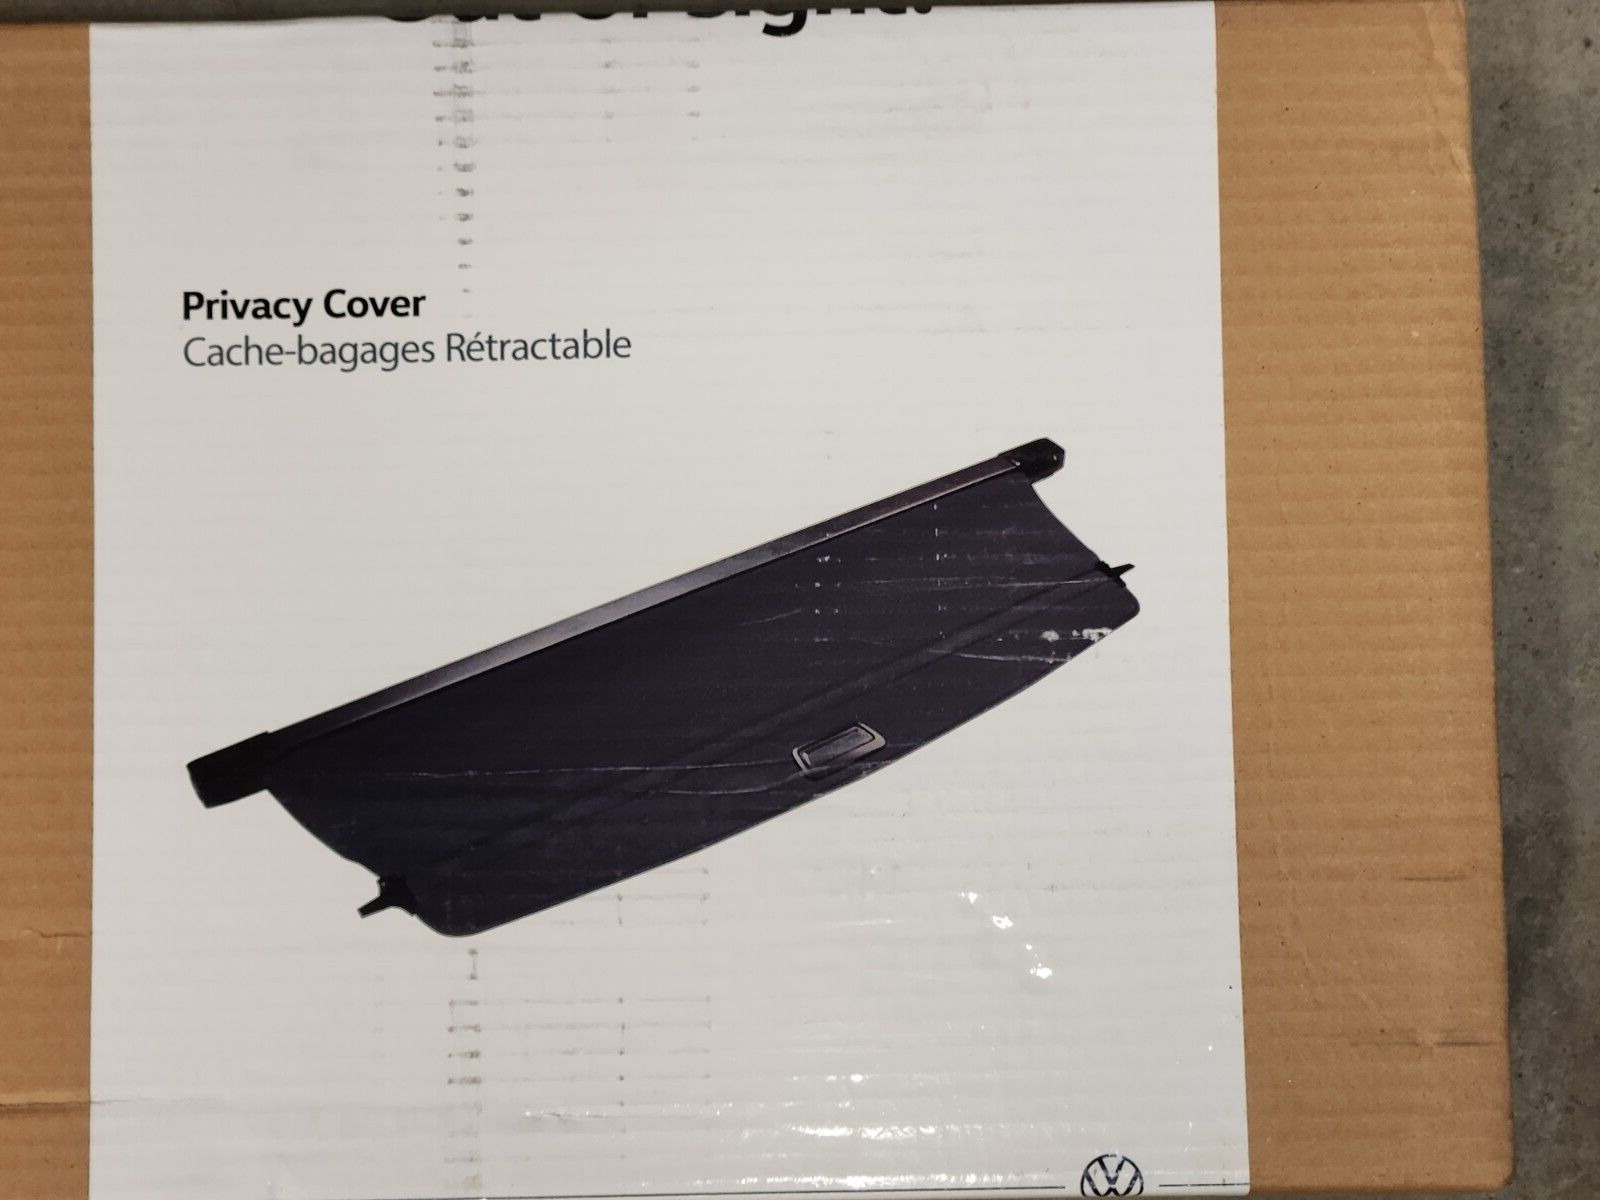 BRAND NEW VW Taos Rear Cargo Cover - Cheapest NEW on the internet